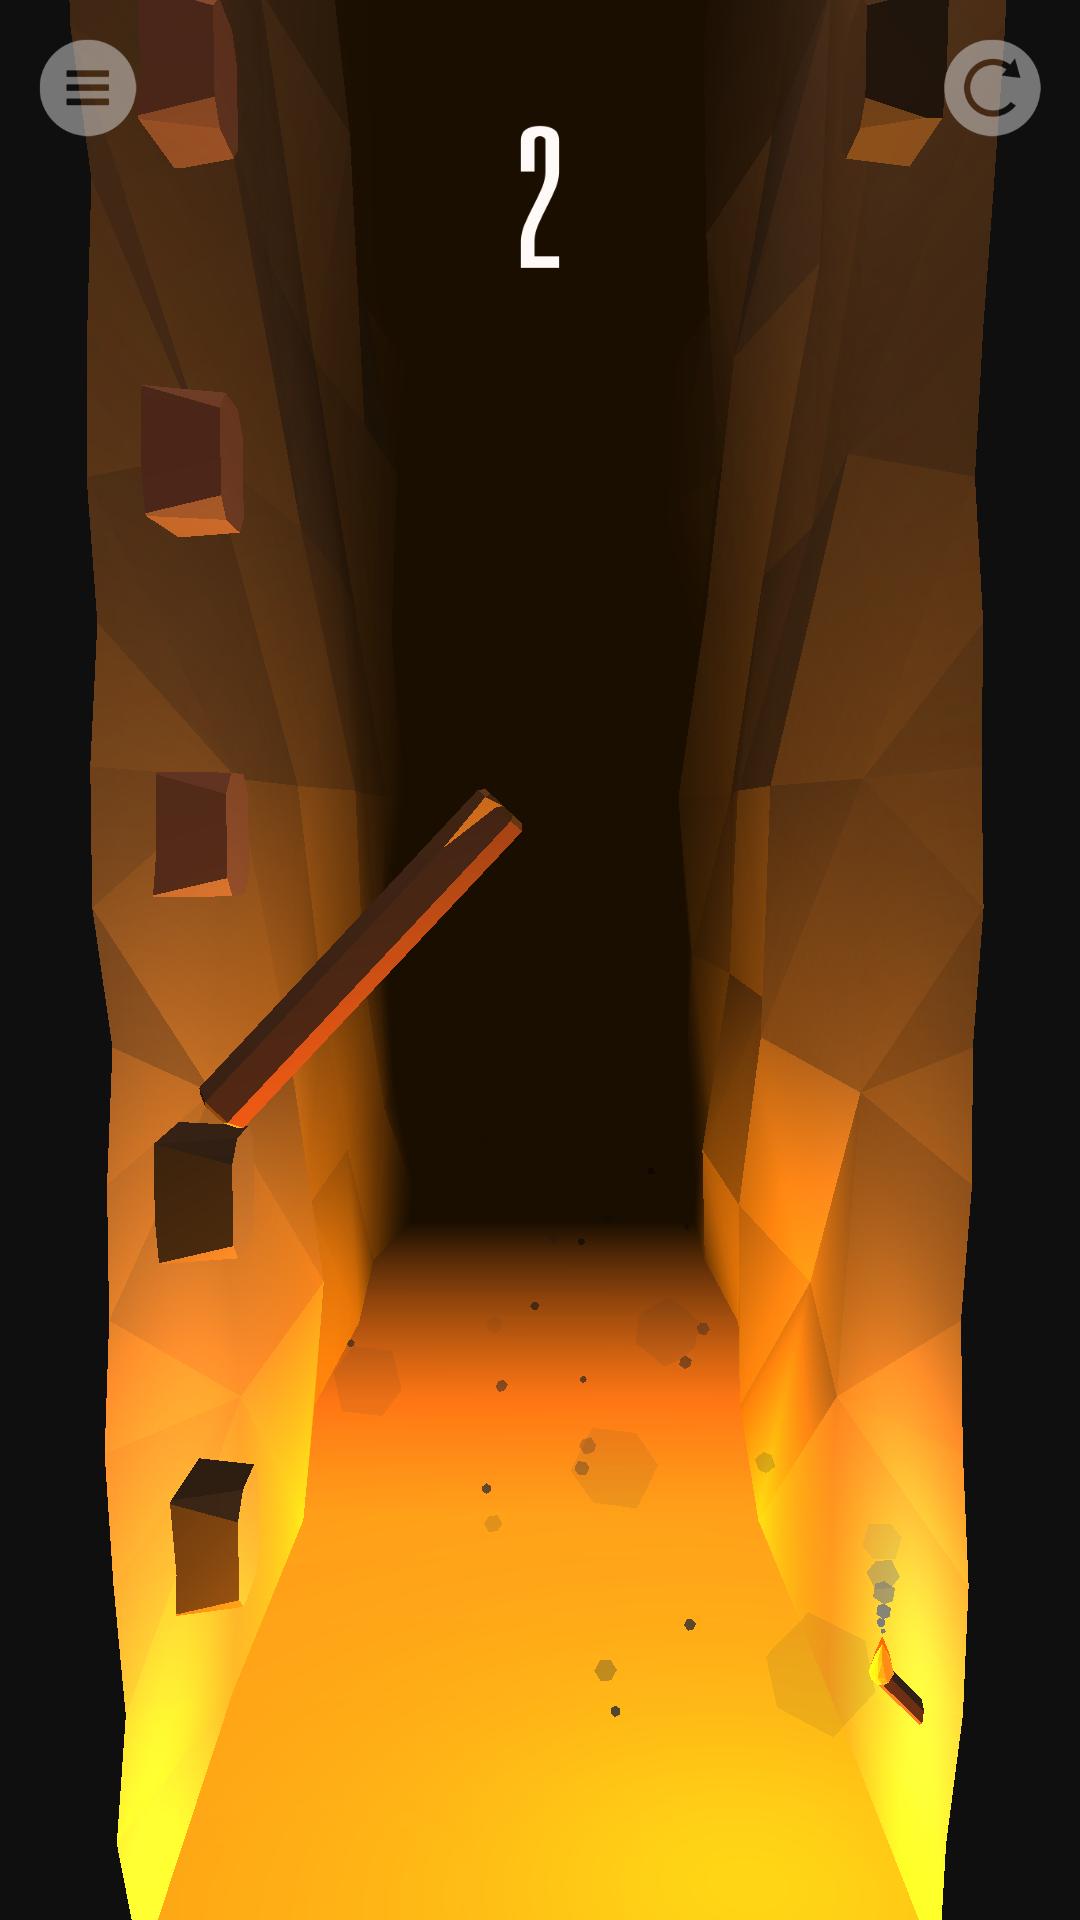 A difficult game about climbing чит. Log down.